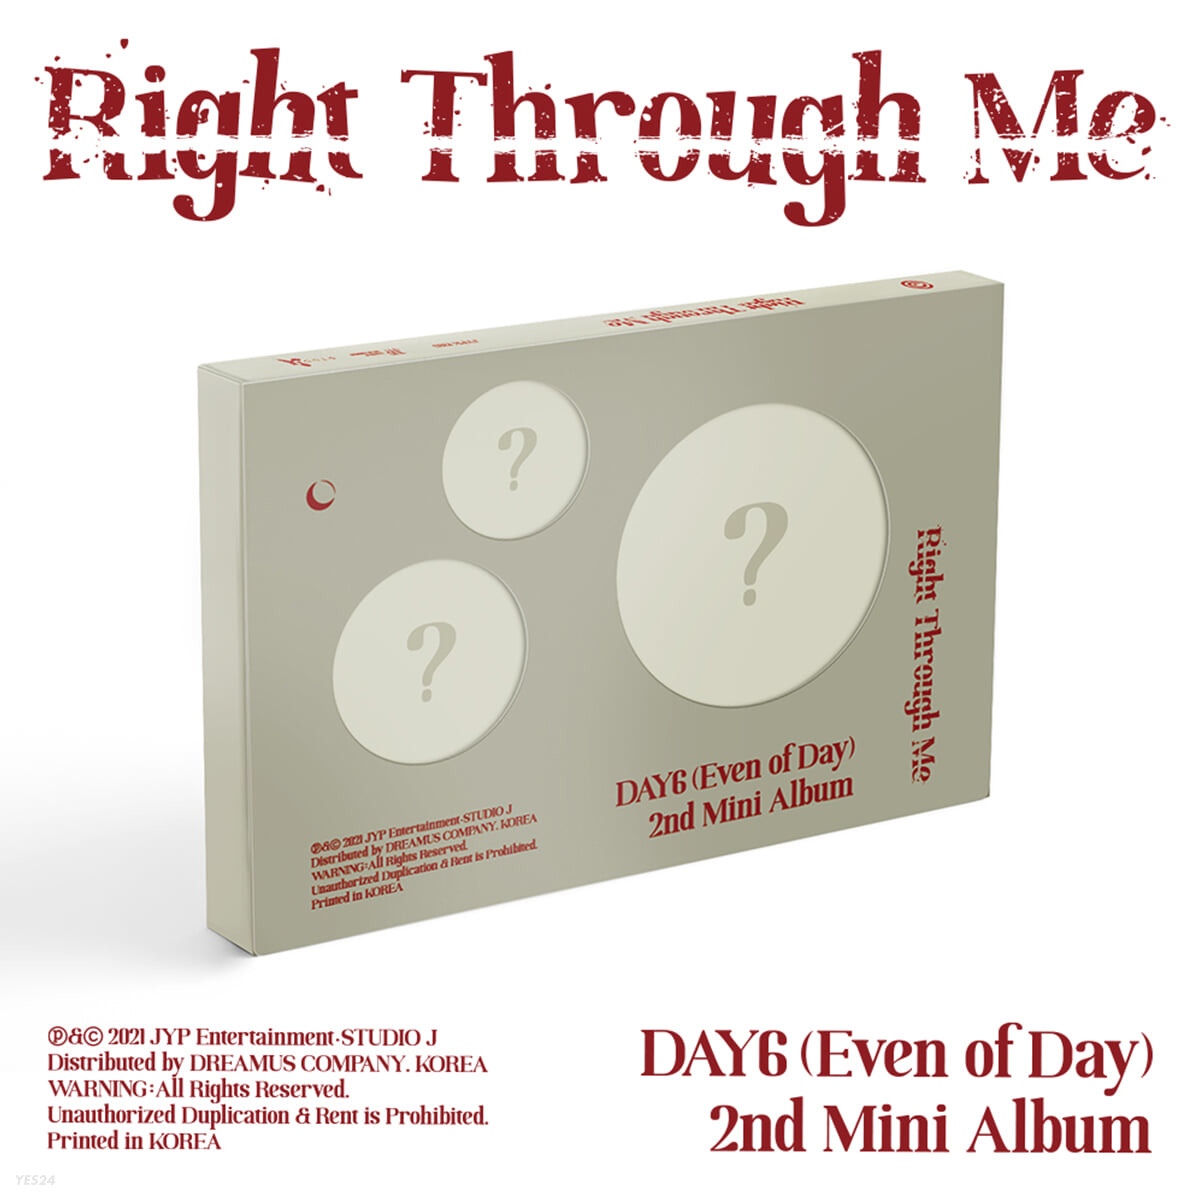 DAY6 (Even of Day) - Right Through Me - YES24